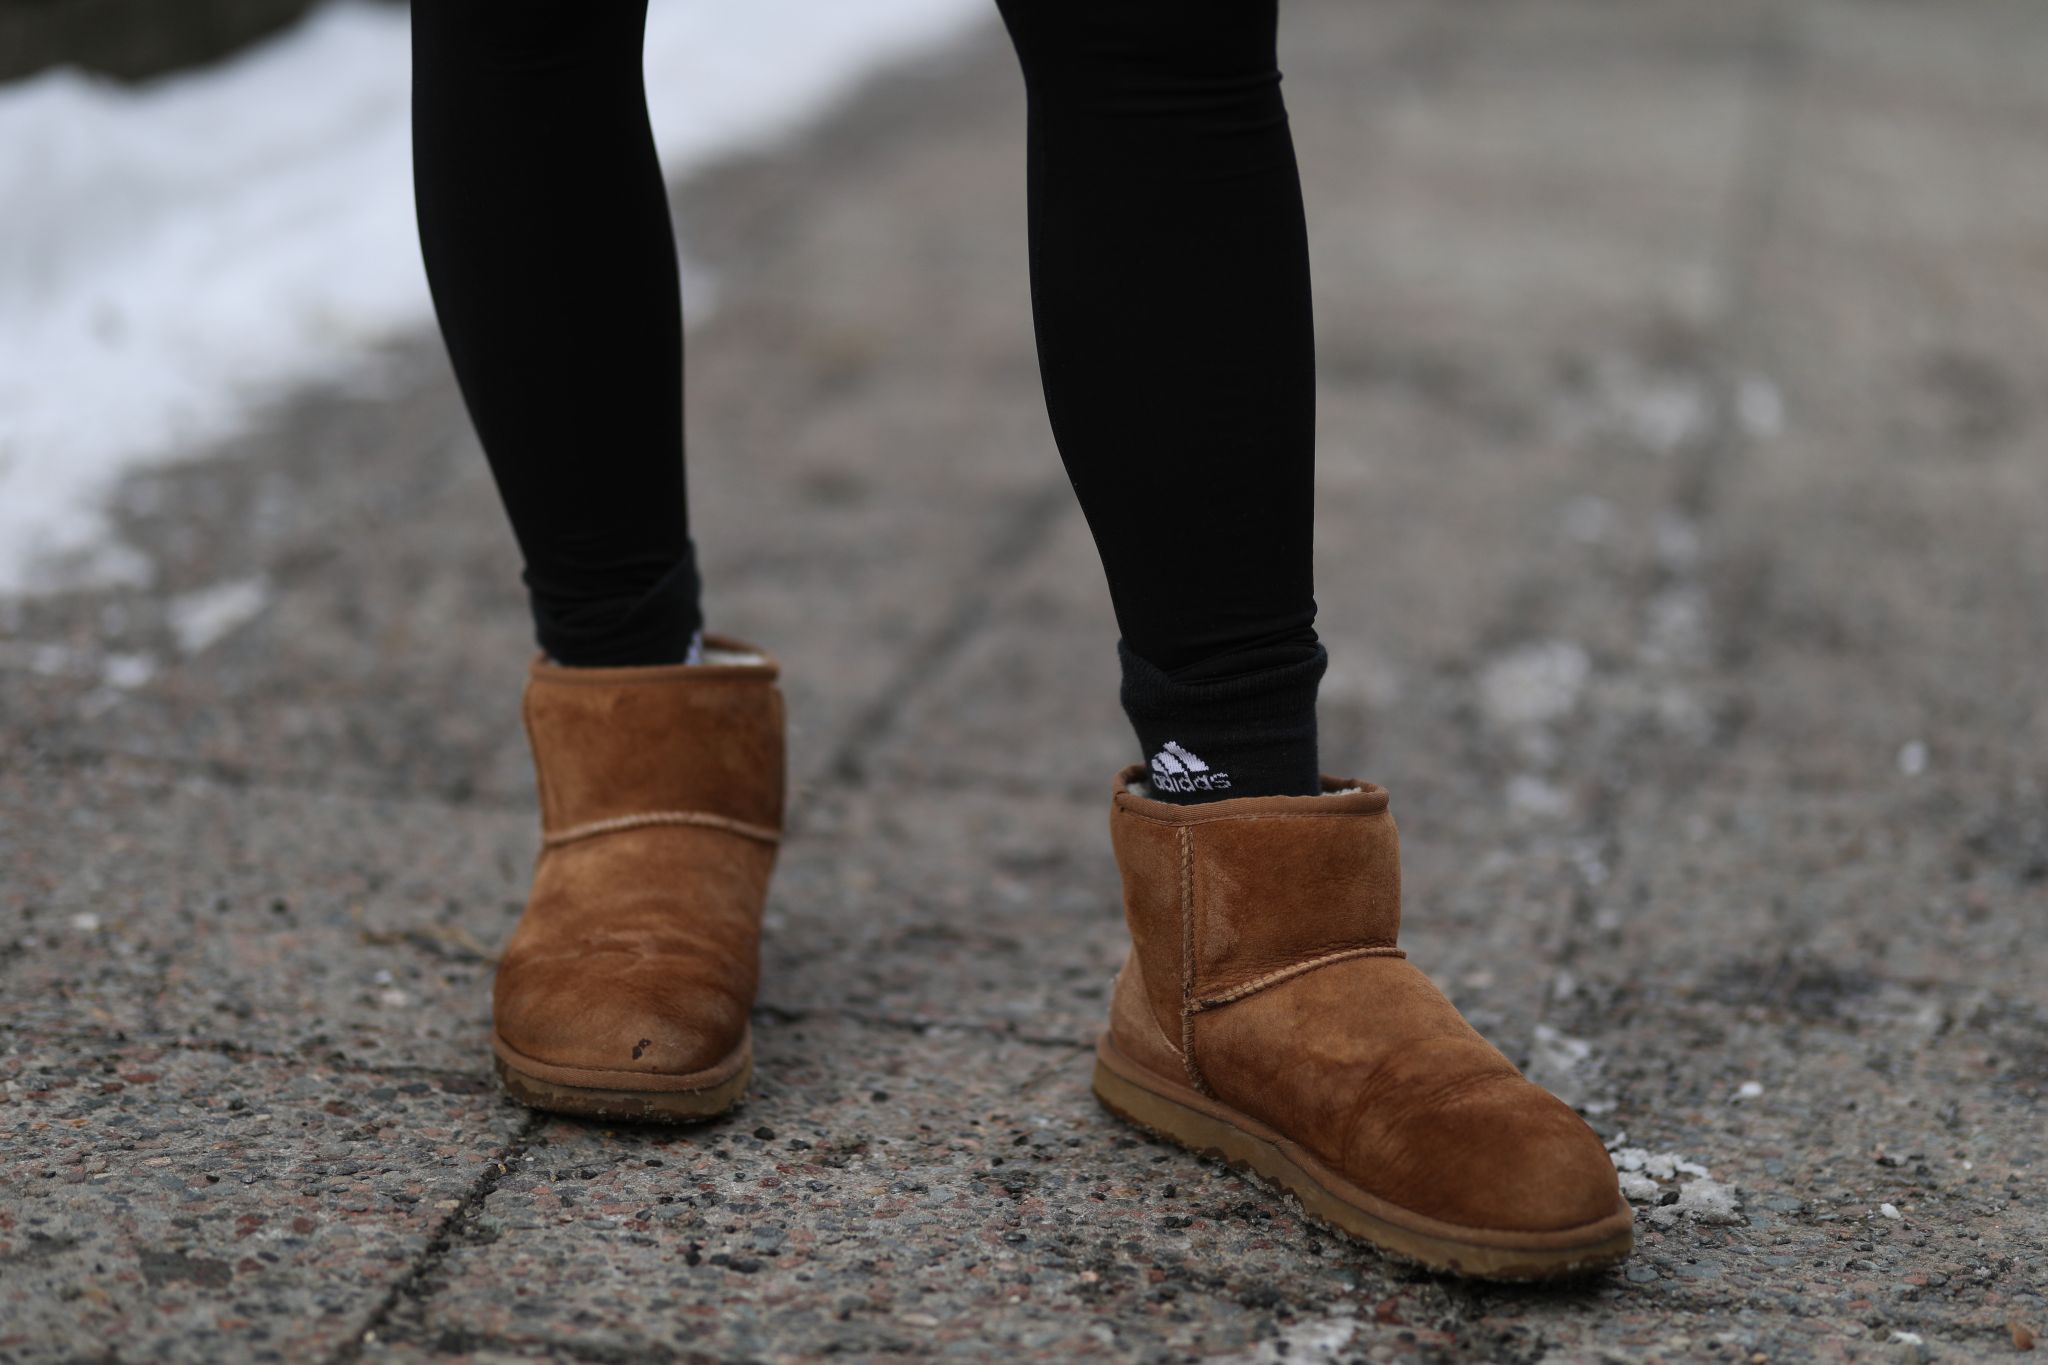 I've owned a pair of UGG boots for 15 years and I still love after all this  time